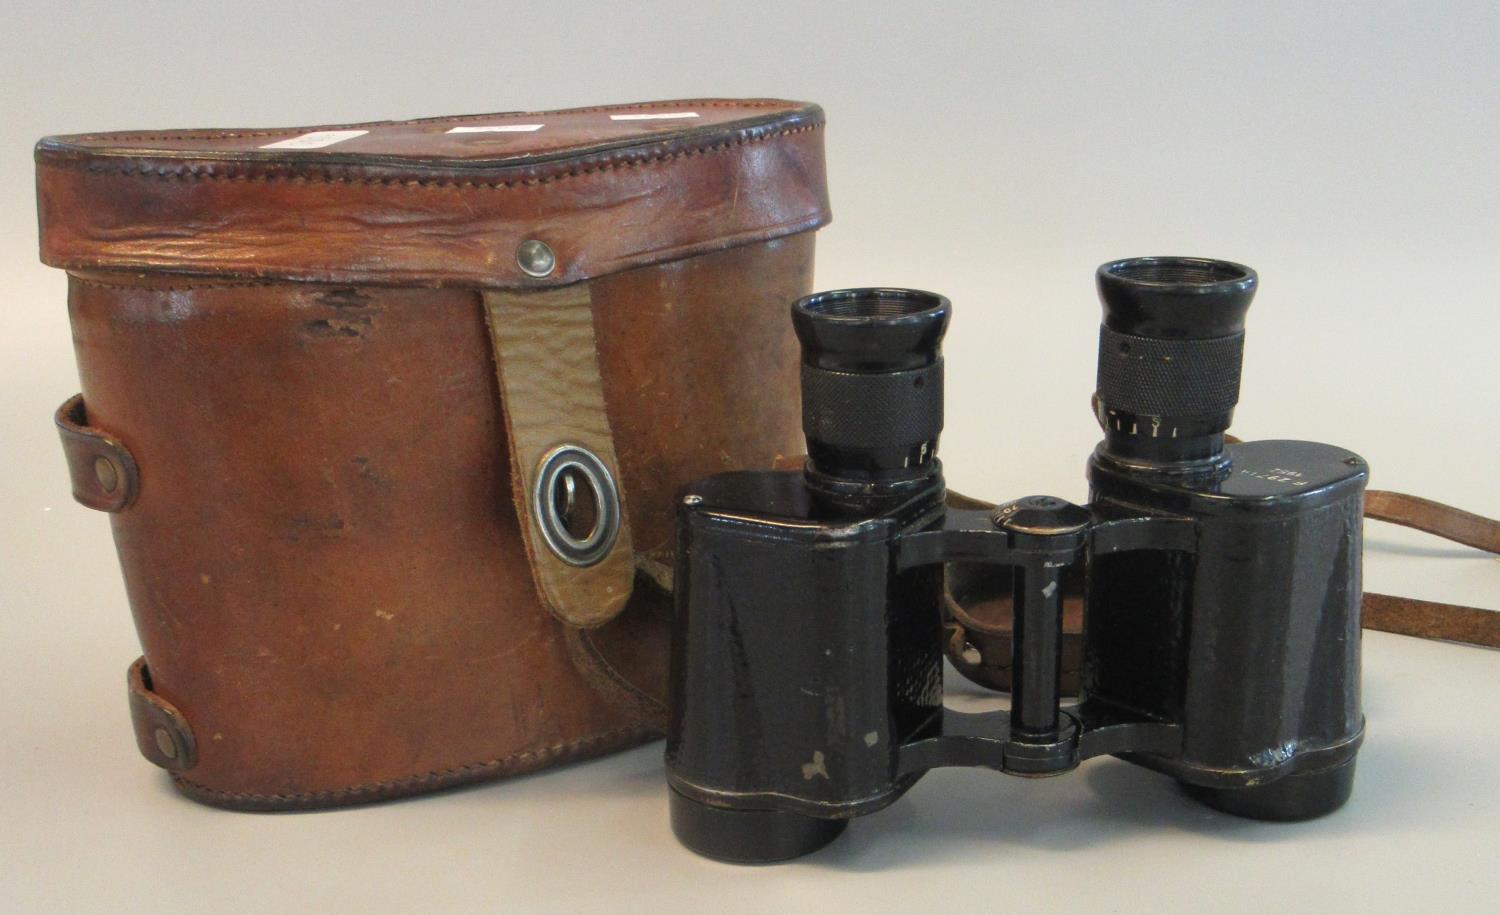 Pair of probably British military binoculars or field glasses in original leather case, bearing